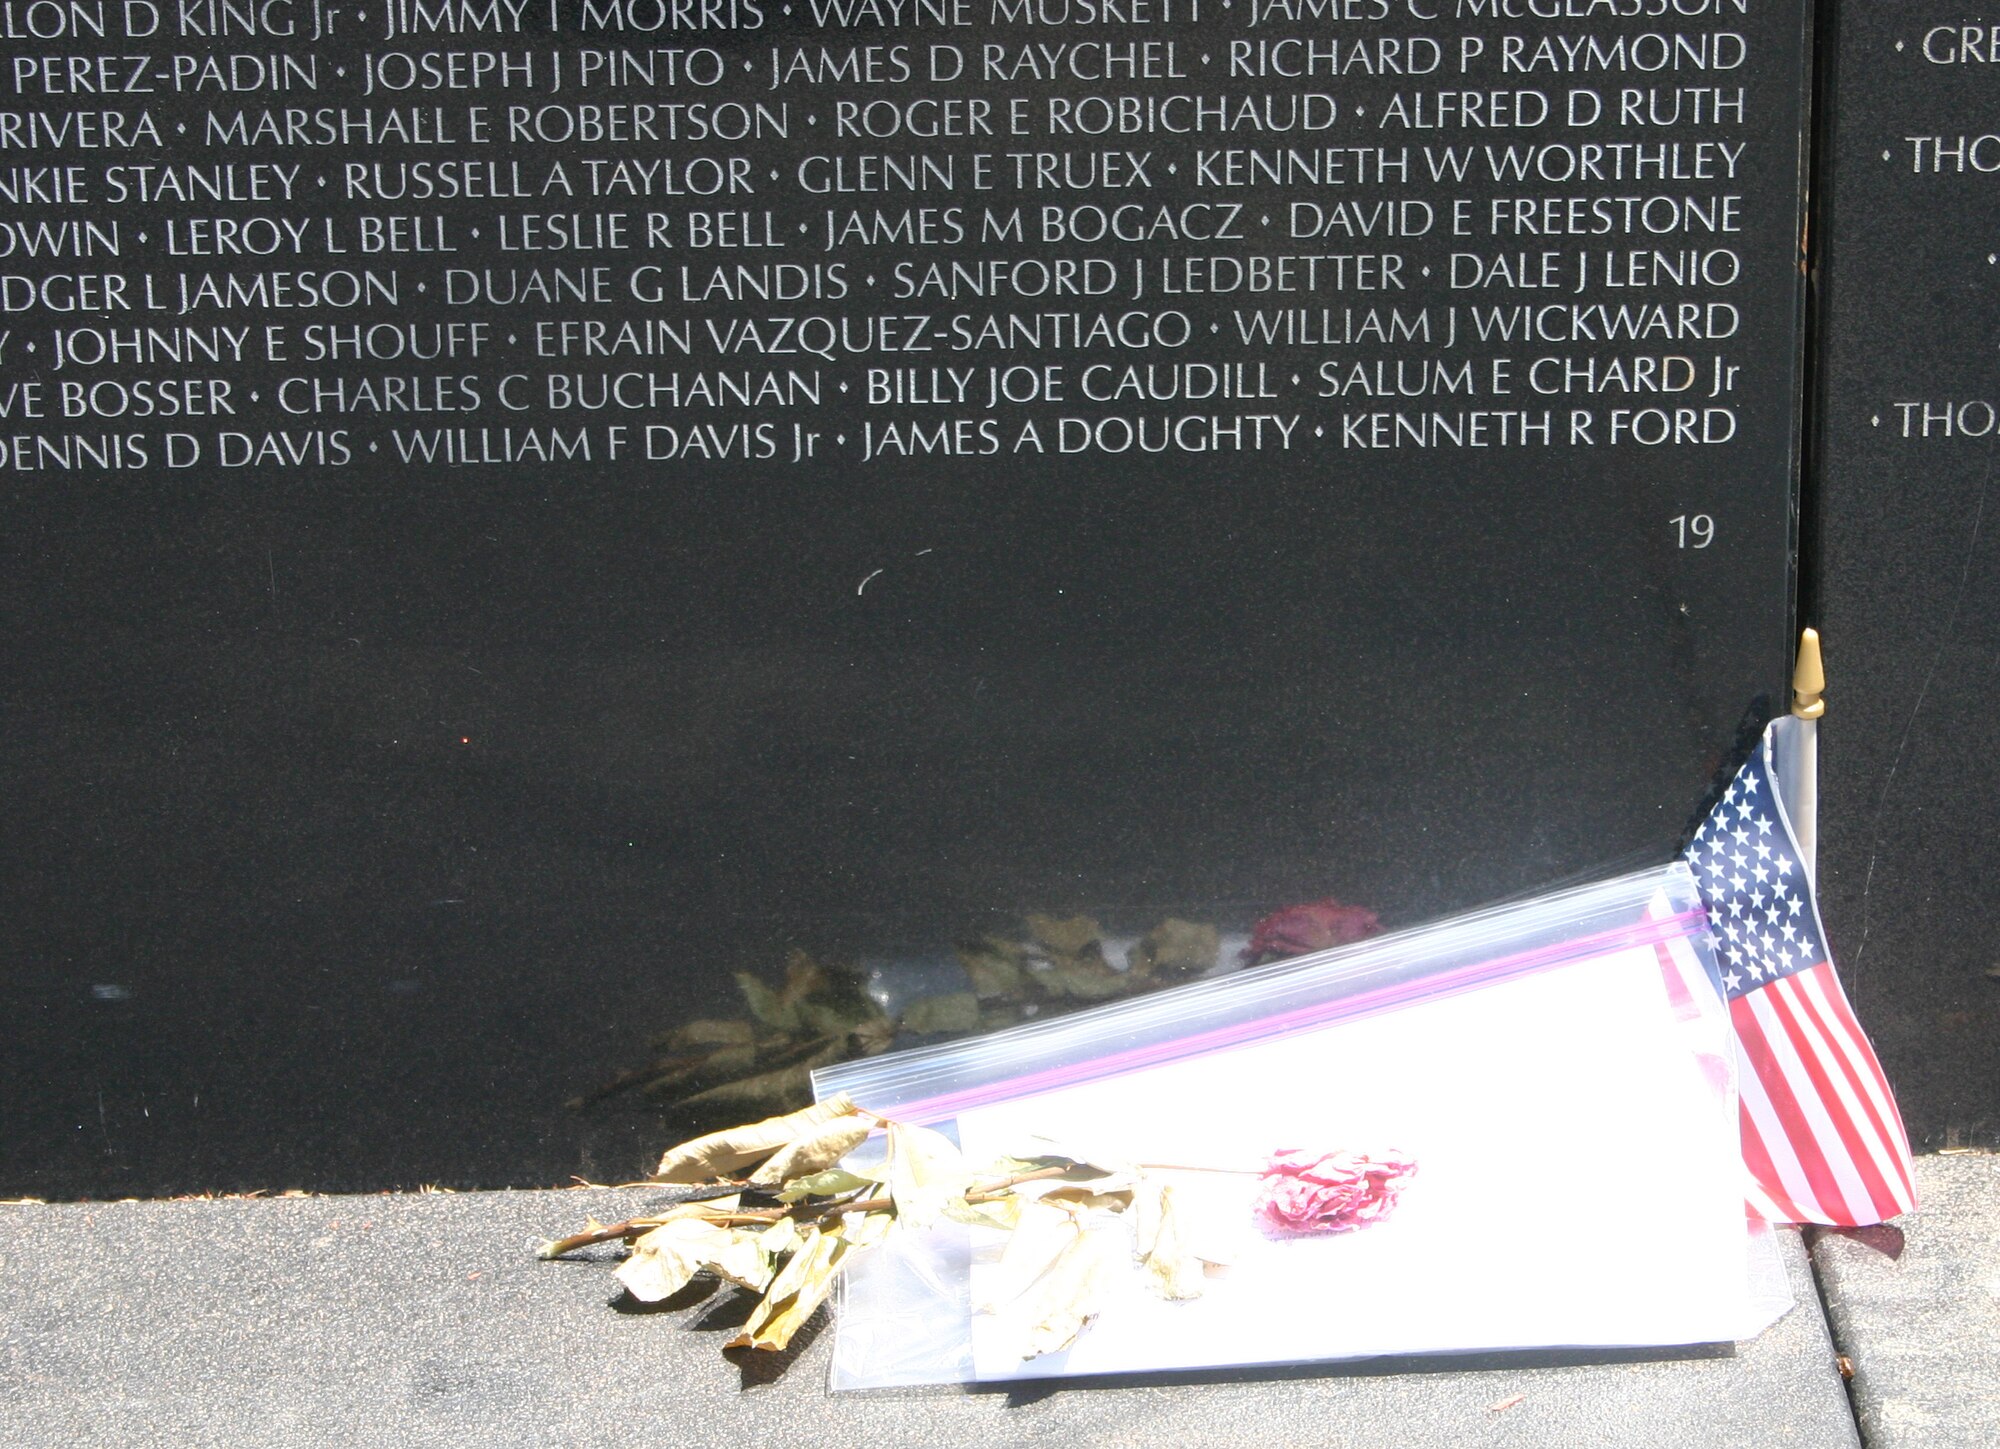 A single rose lays at the base of section 19 of the Vietnam Moving Wall as a tribute to fallen military personnel. The Moving Wall traveled to Wichita Falls June 13 and was open to the public June 16 through Sunday. (U.S. Air Force photo/Senior Airman Tonnette Thompson).